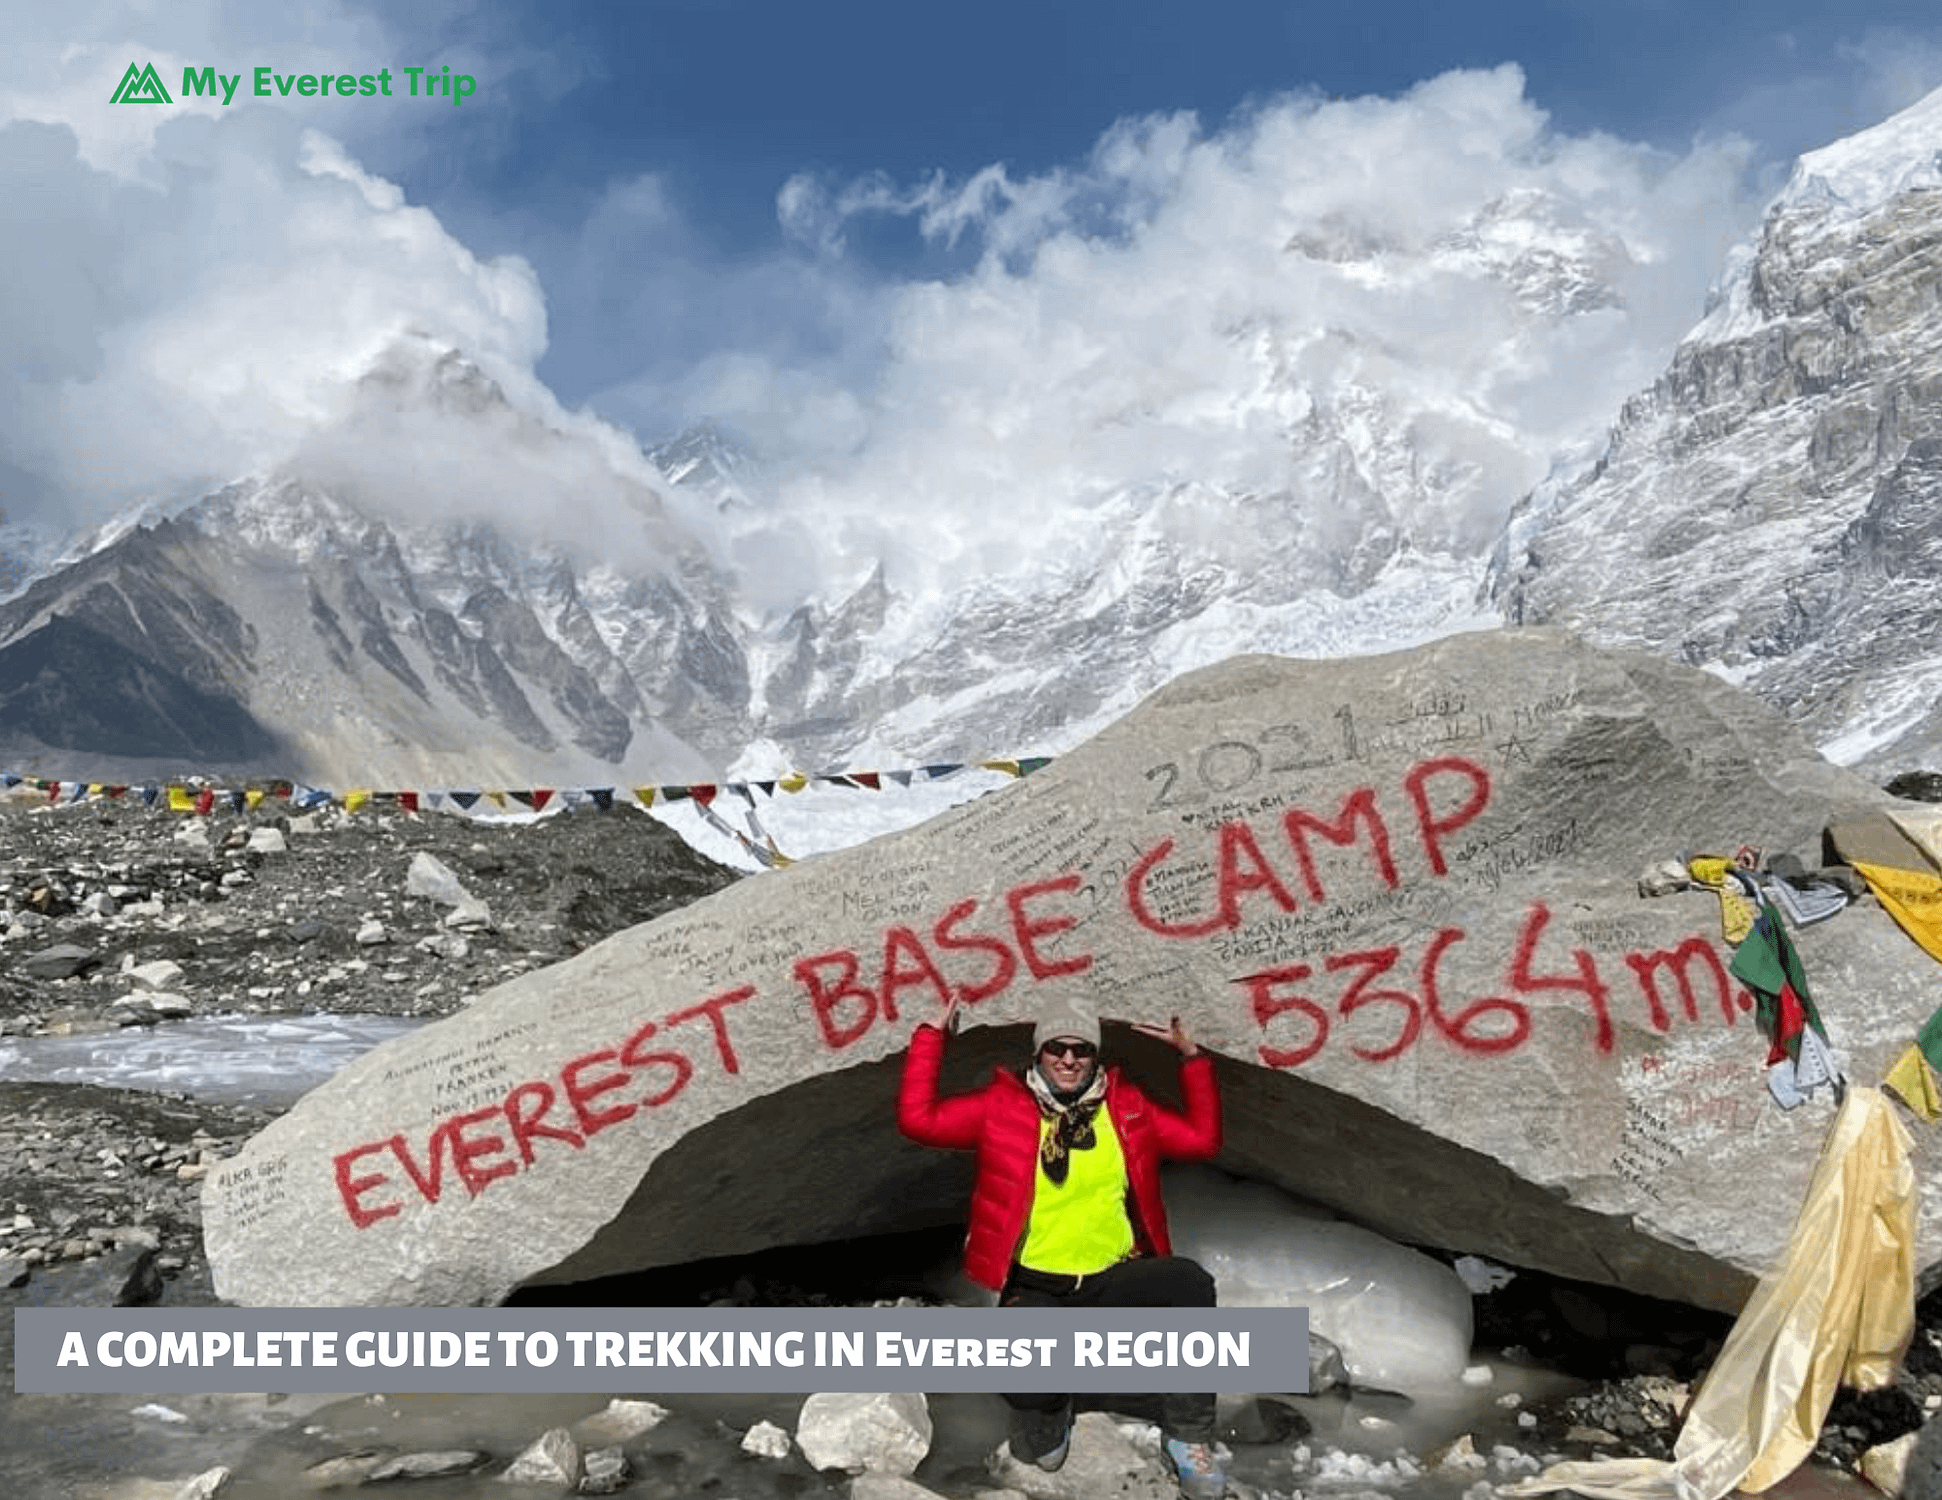 A complete guide to trekking in Everest region